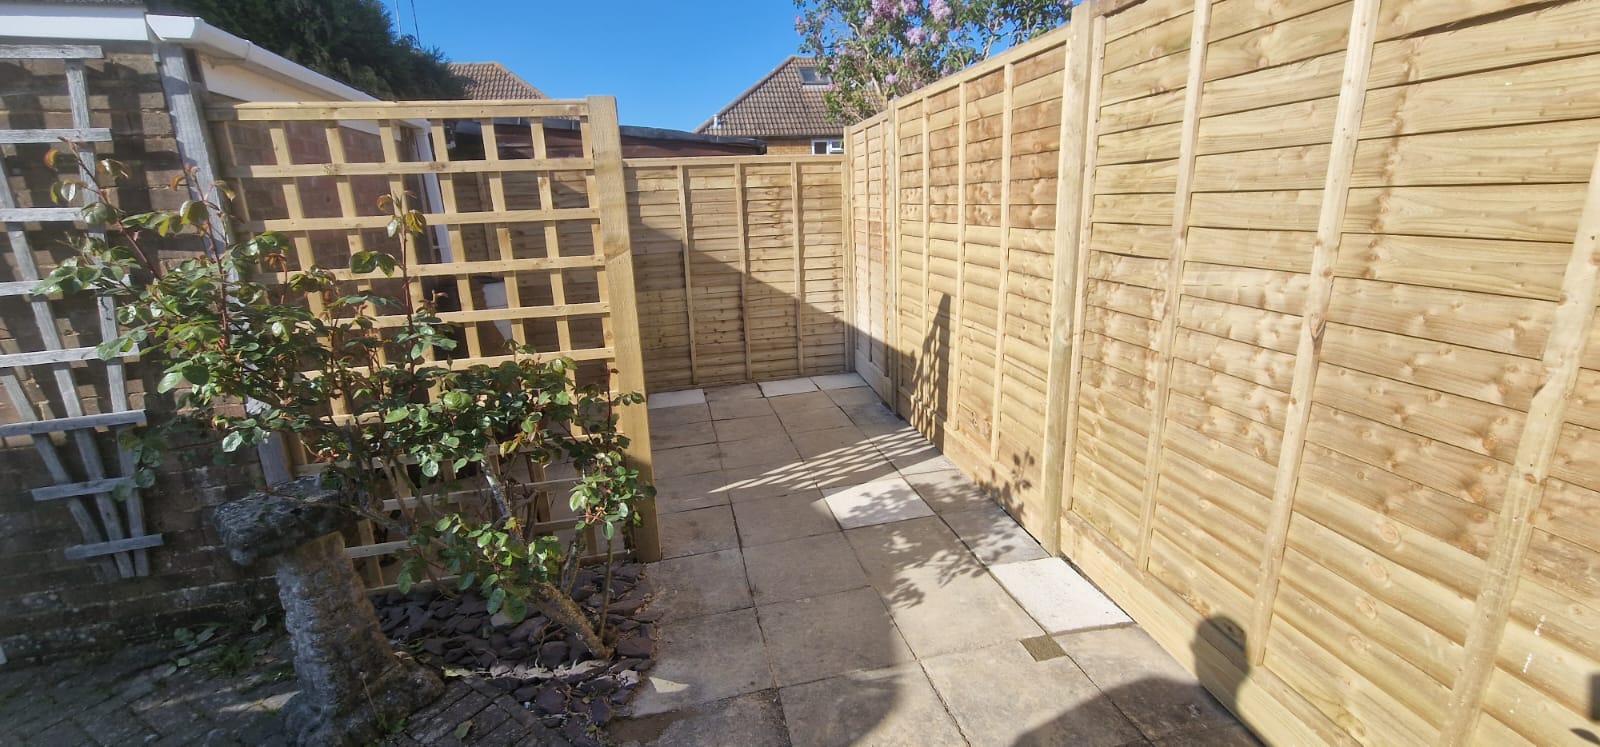 Fencing-and-gates-sussex-jmlandscaping